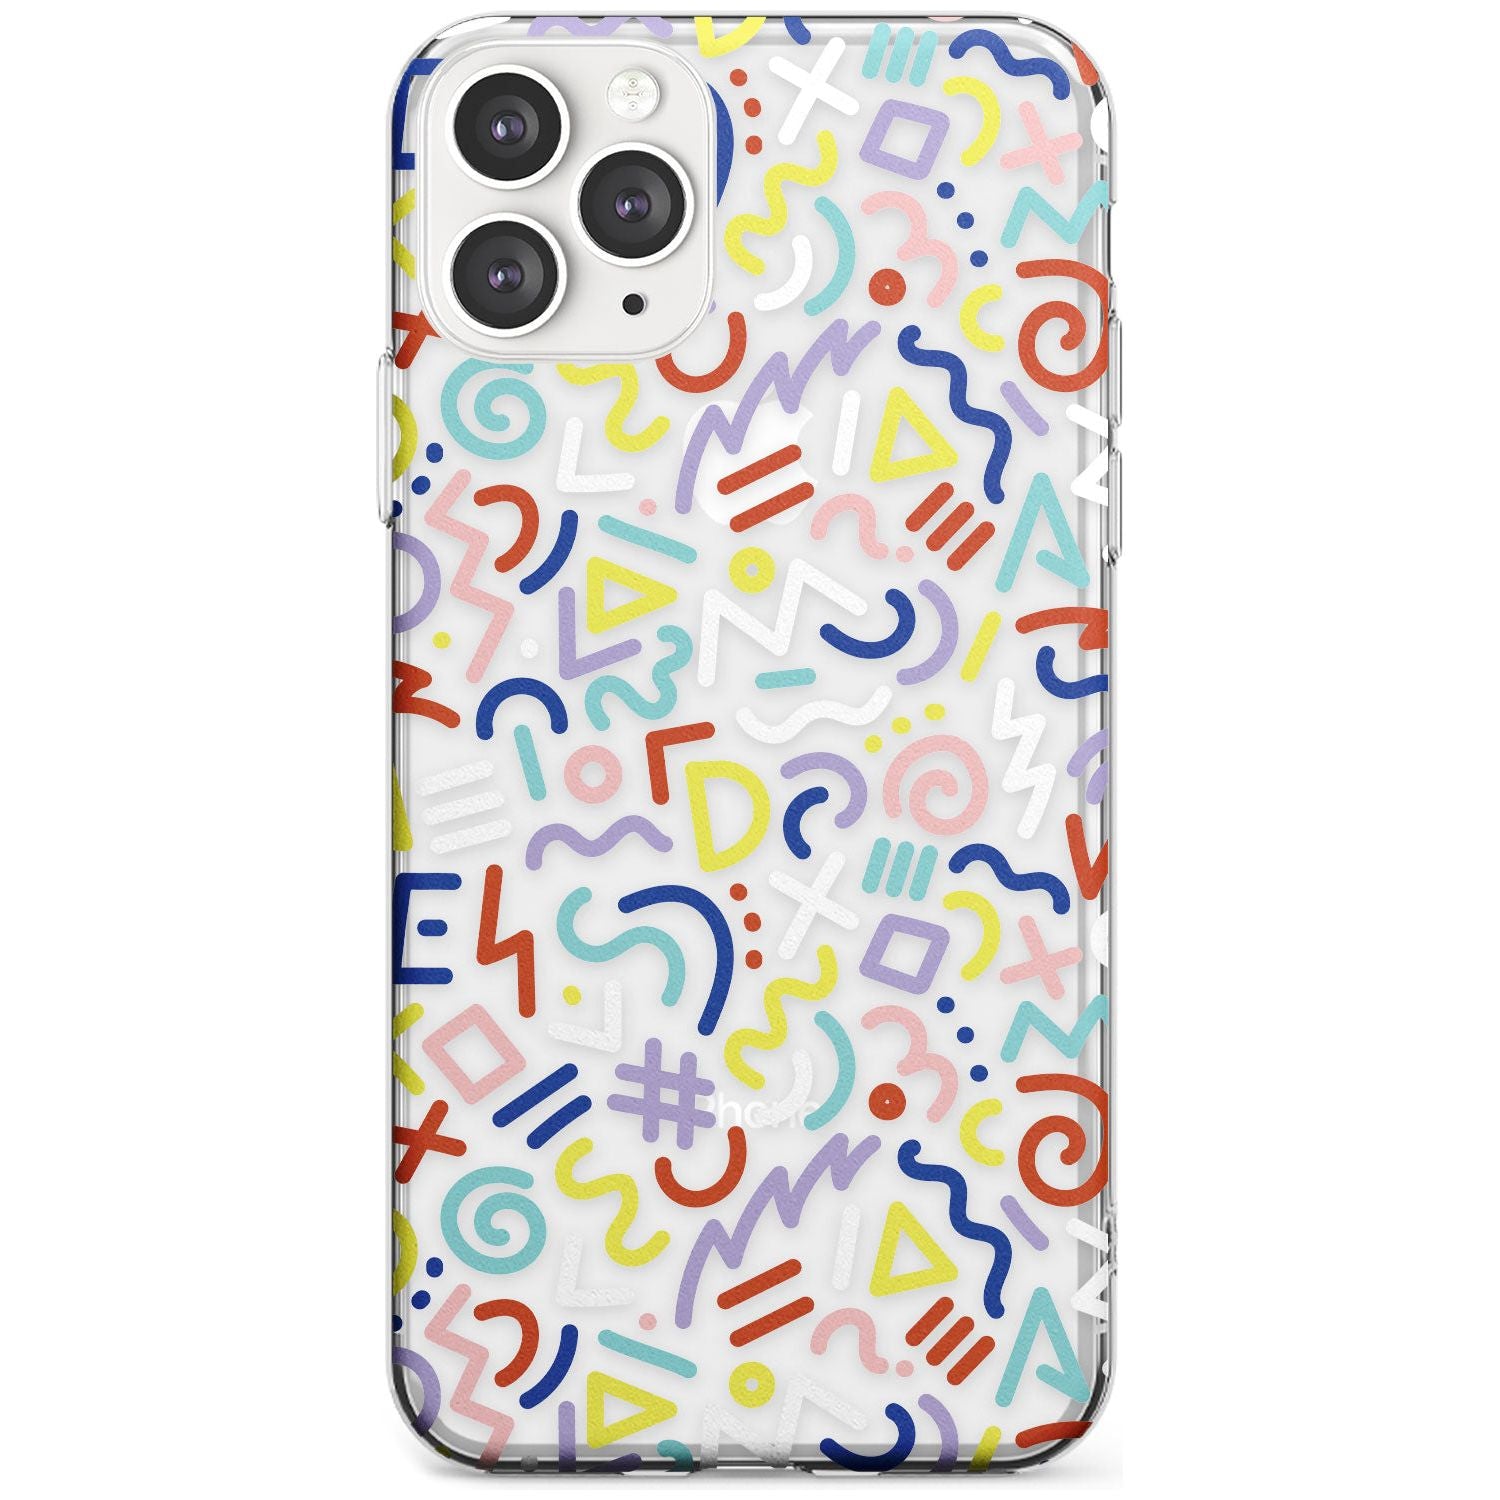 Colourful Mixed Shapes Retro Pattern Design Slim TPU Phone Case for iPhone 11 Pro Max